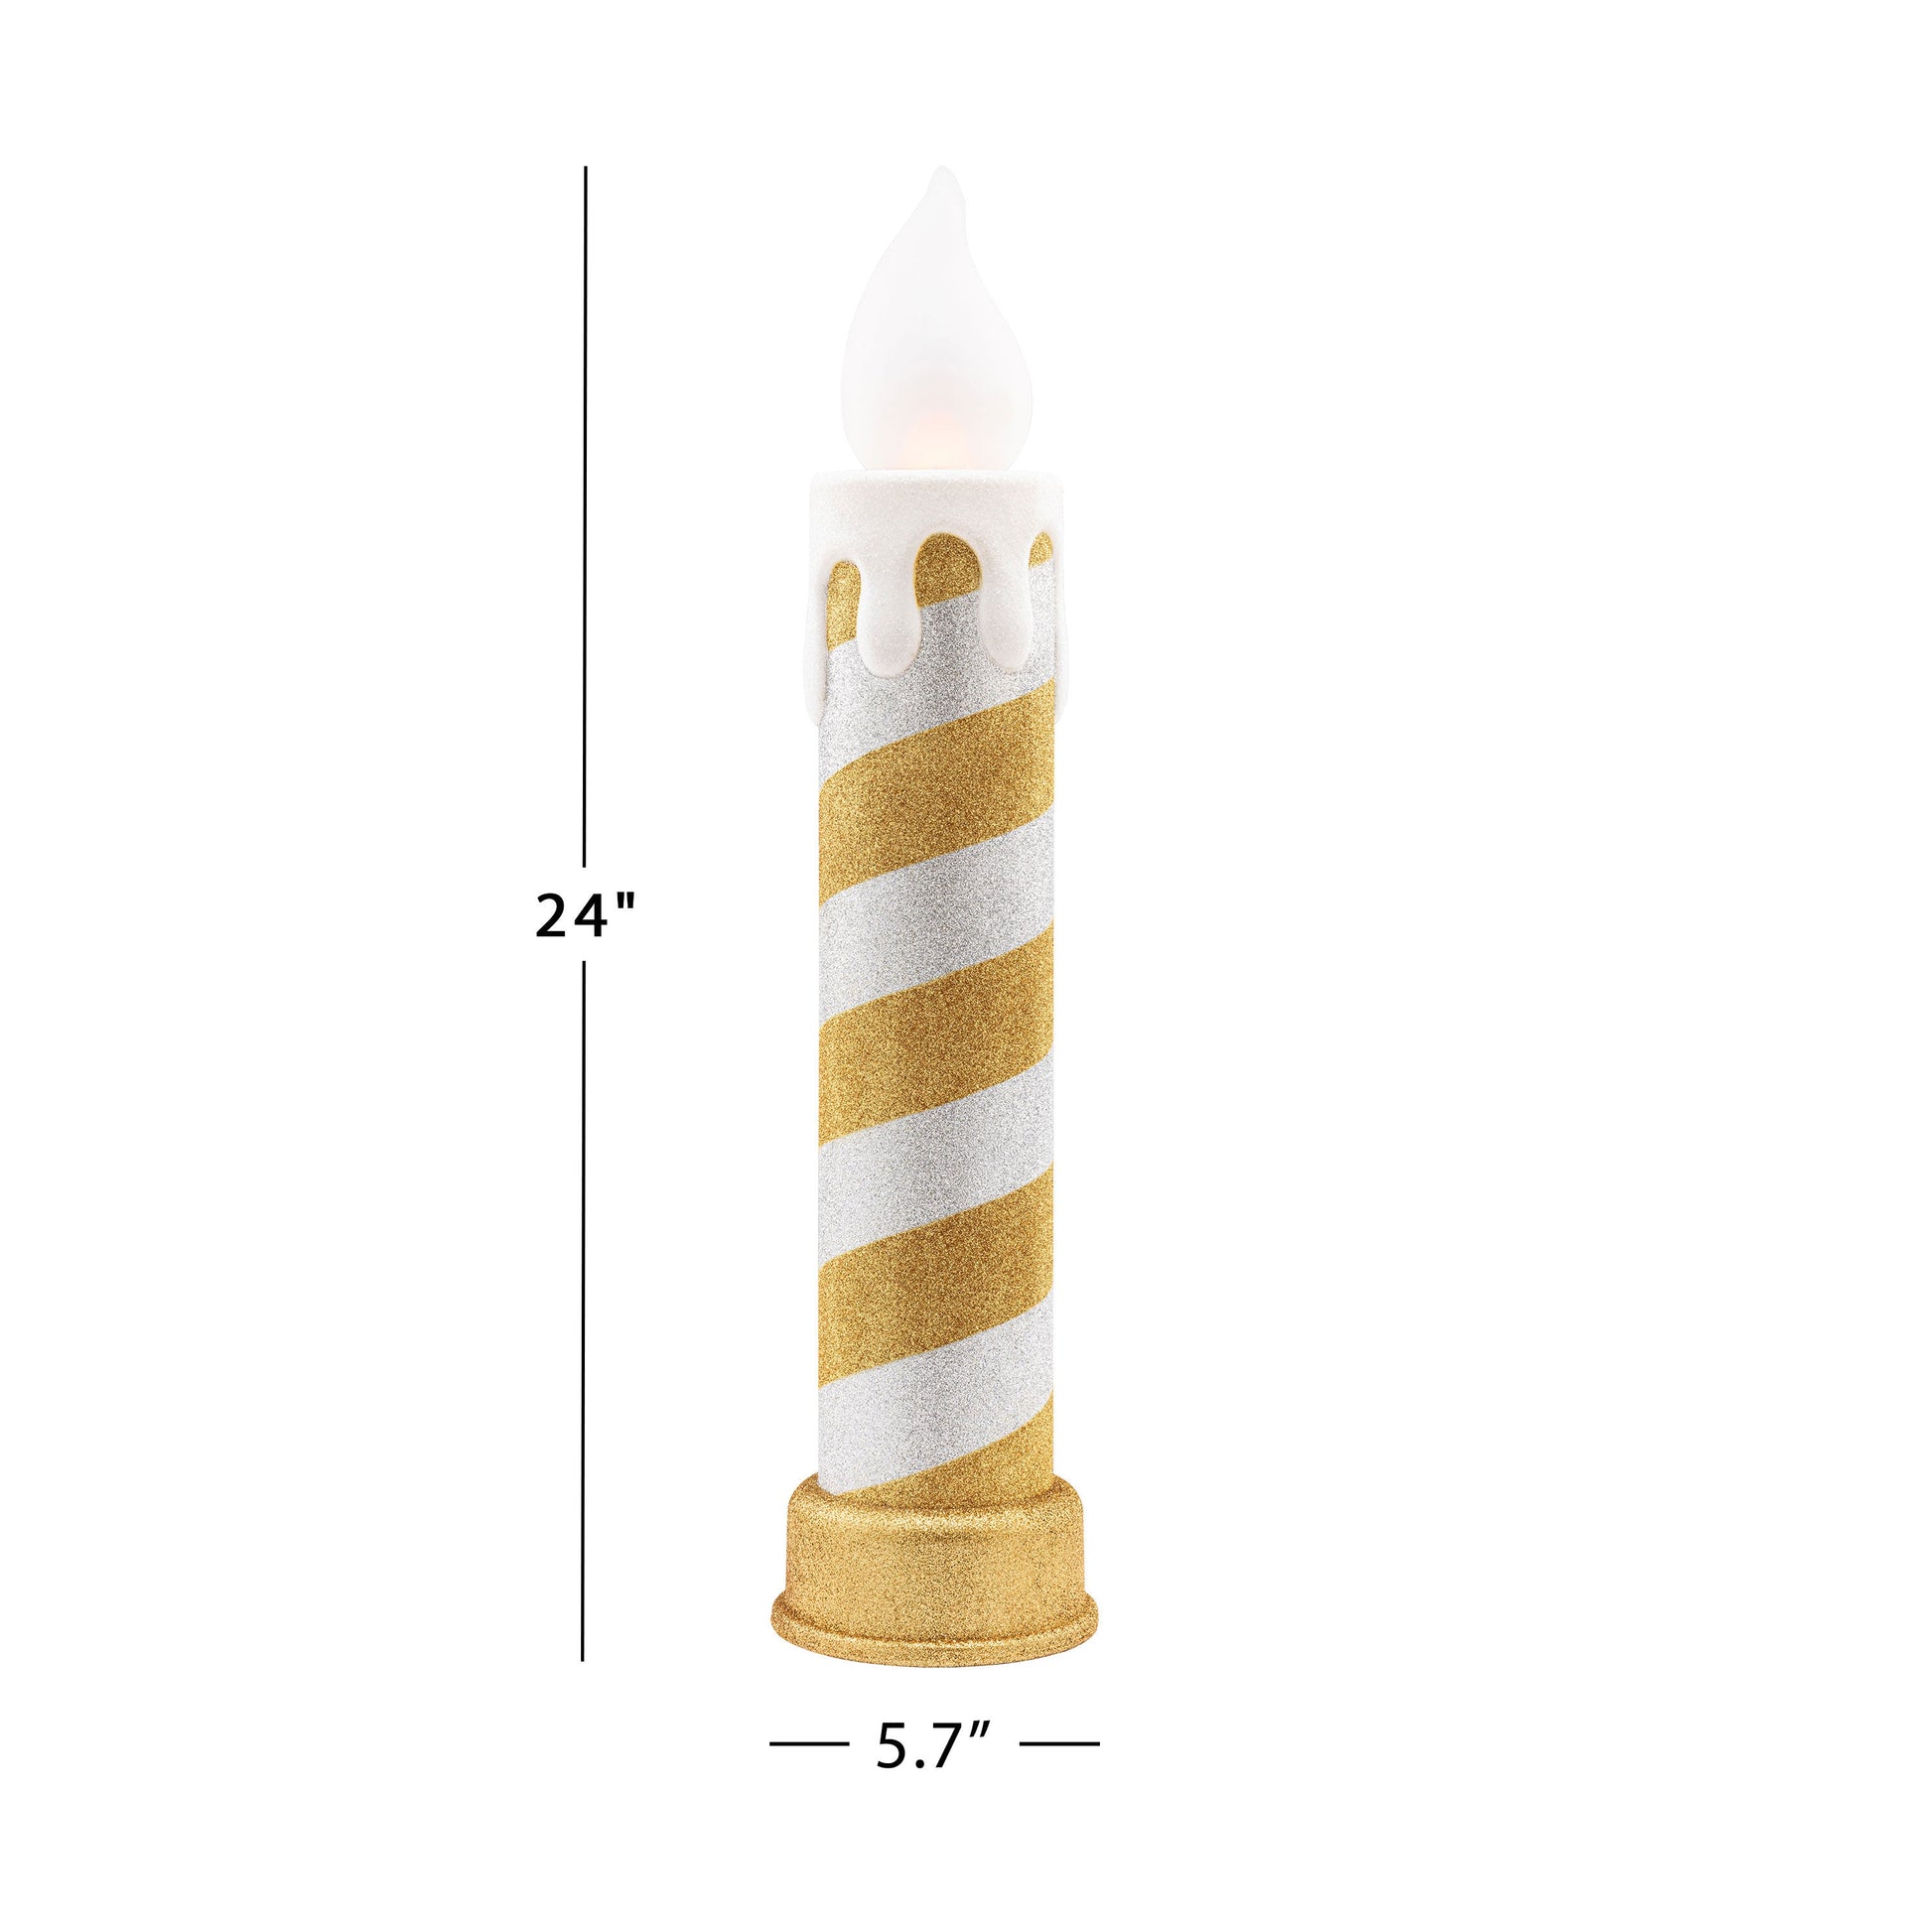 90th Anniversary Collection - 24" LED Blow Mold Candle, Gold & Silver - Mr. Christmas